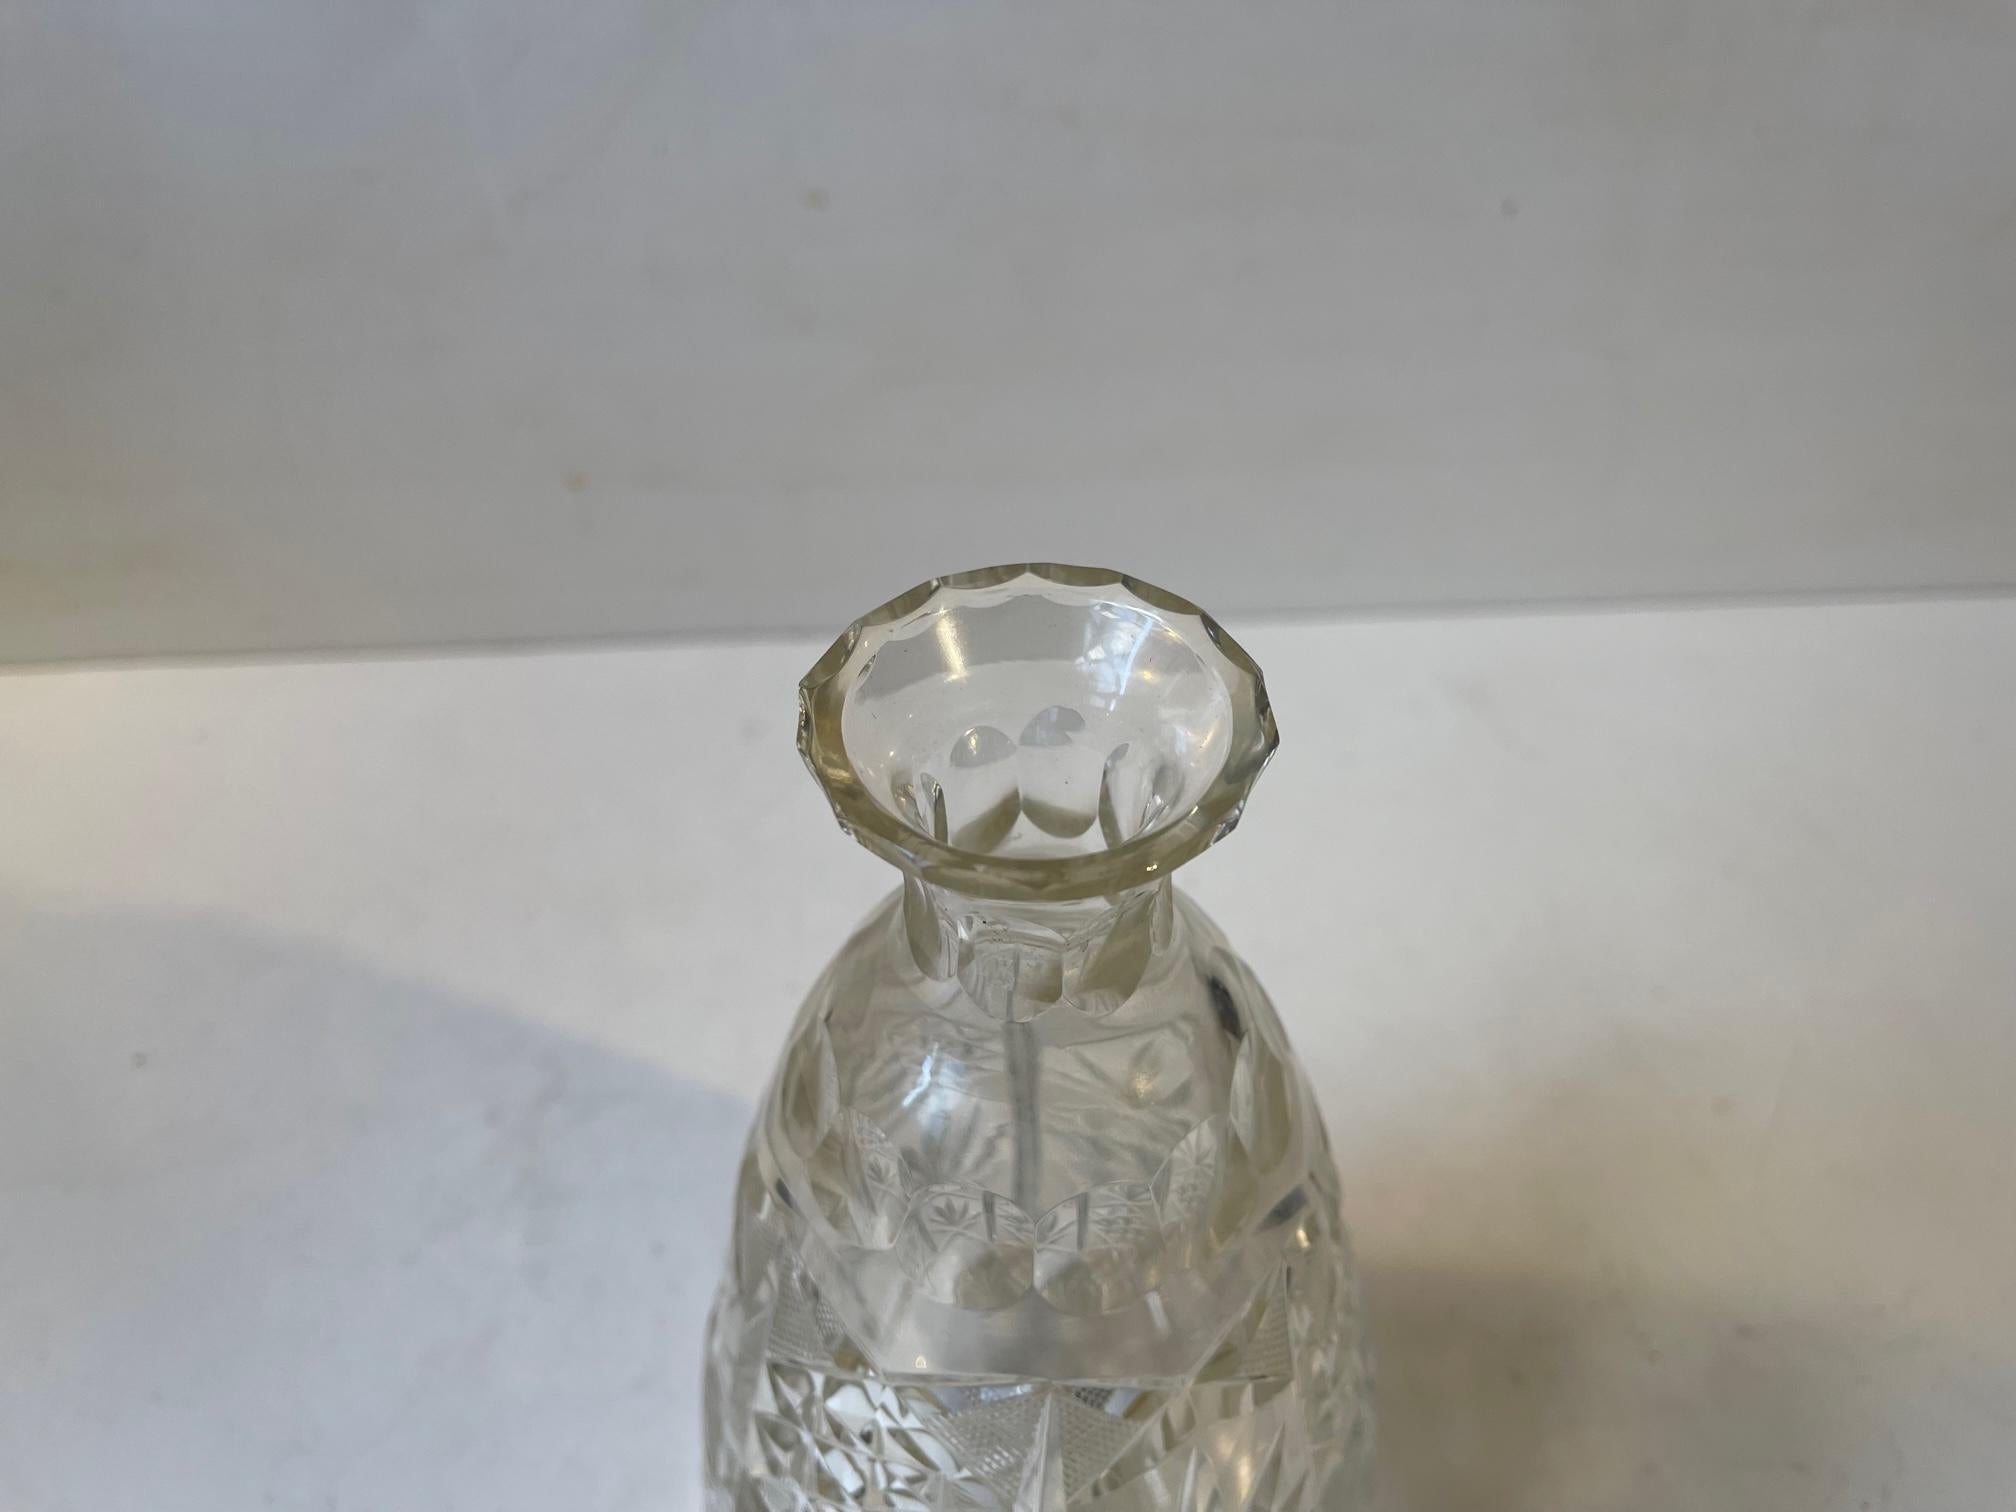 French Midcentury Cut Crystal Decanter from Cristal De Lorraine, 1950s In Good Condition For Sale In Esbjerg, DK